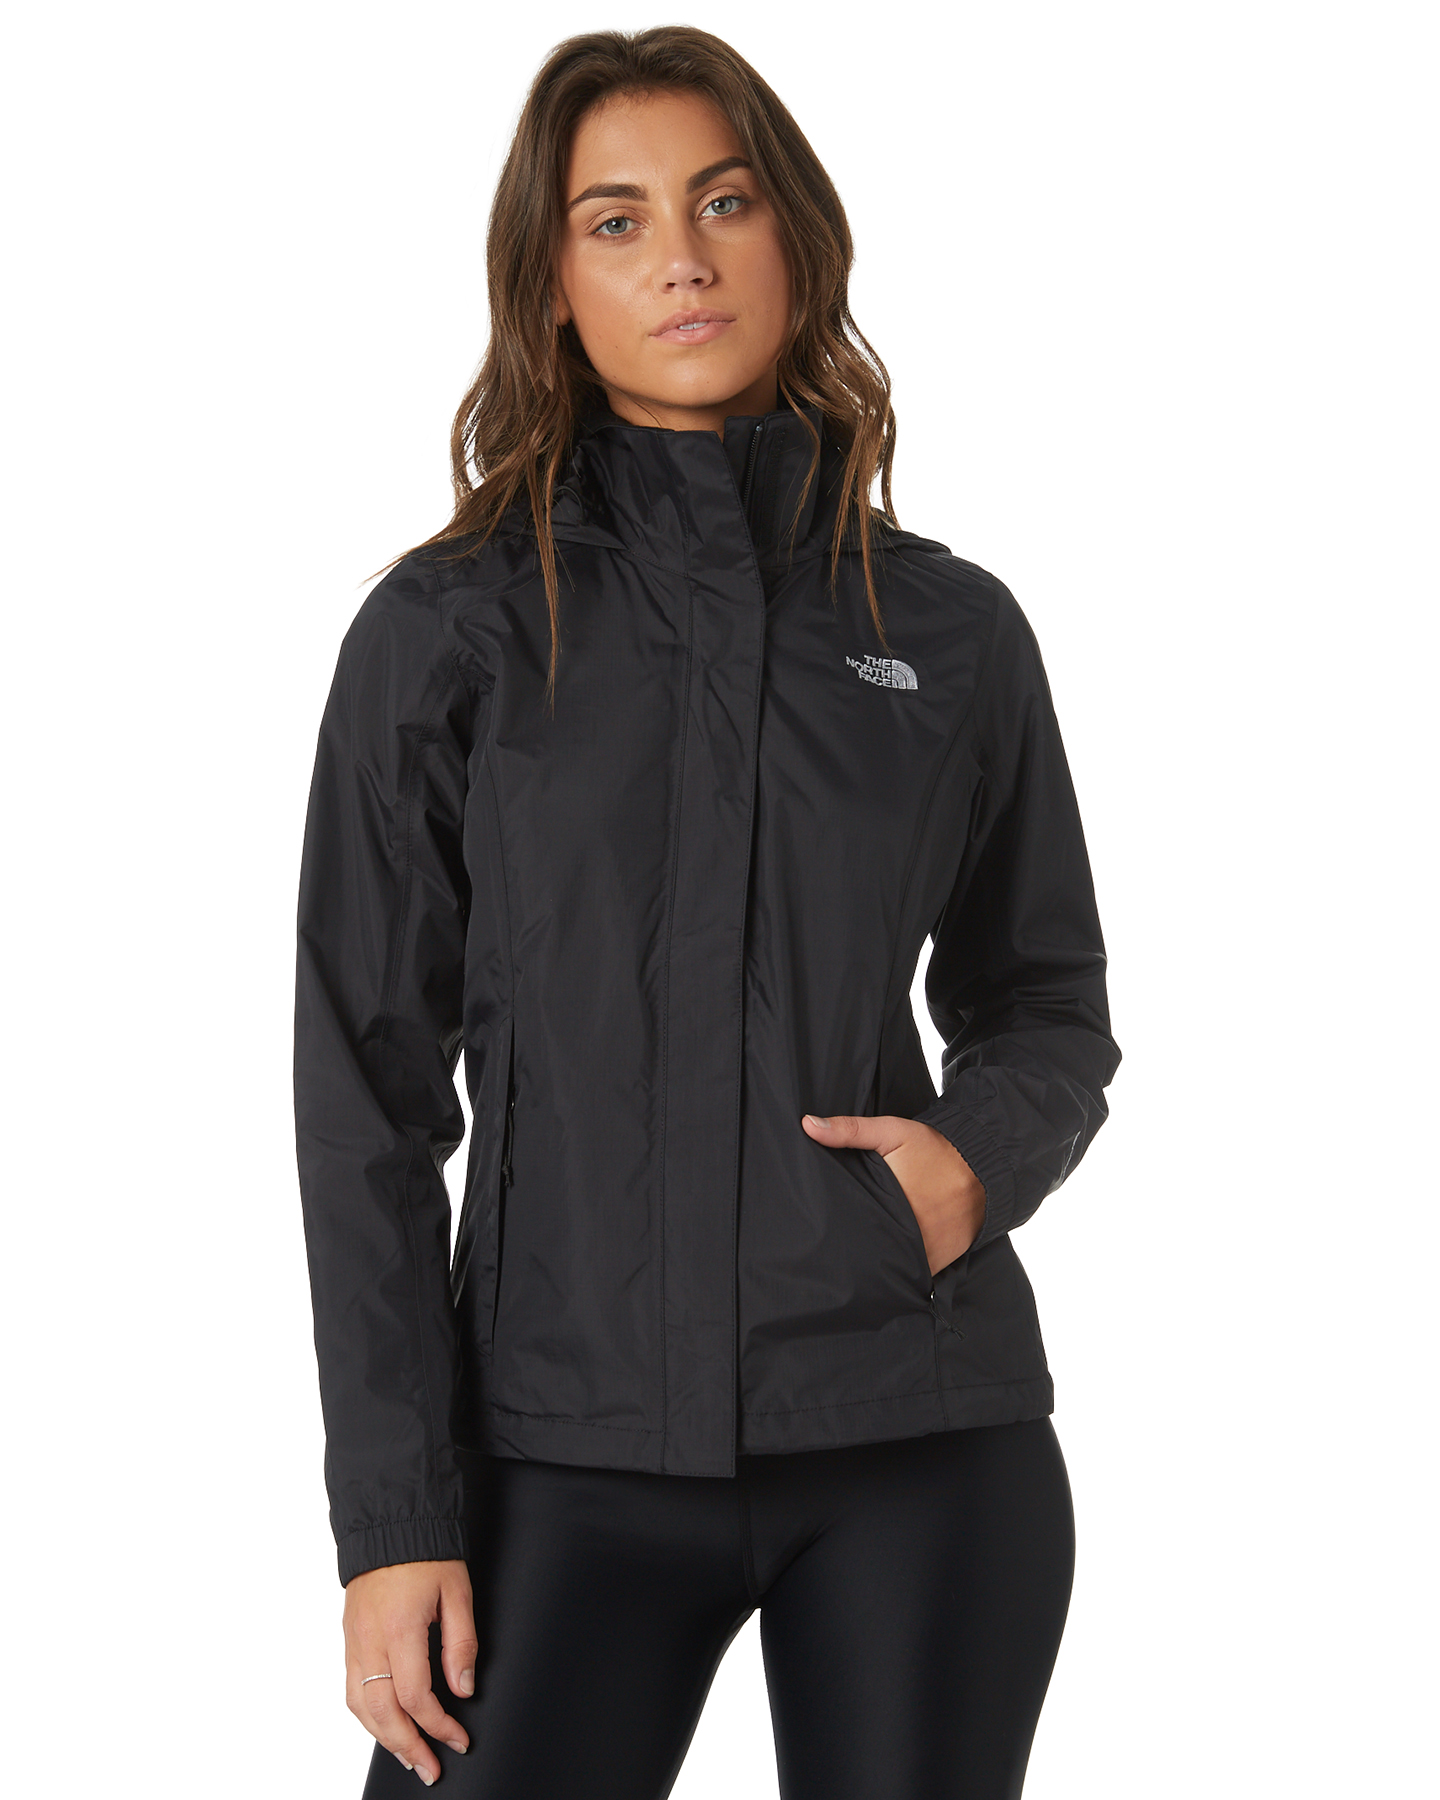 north face resolve 2 womens jacket 